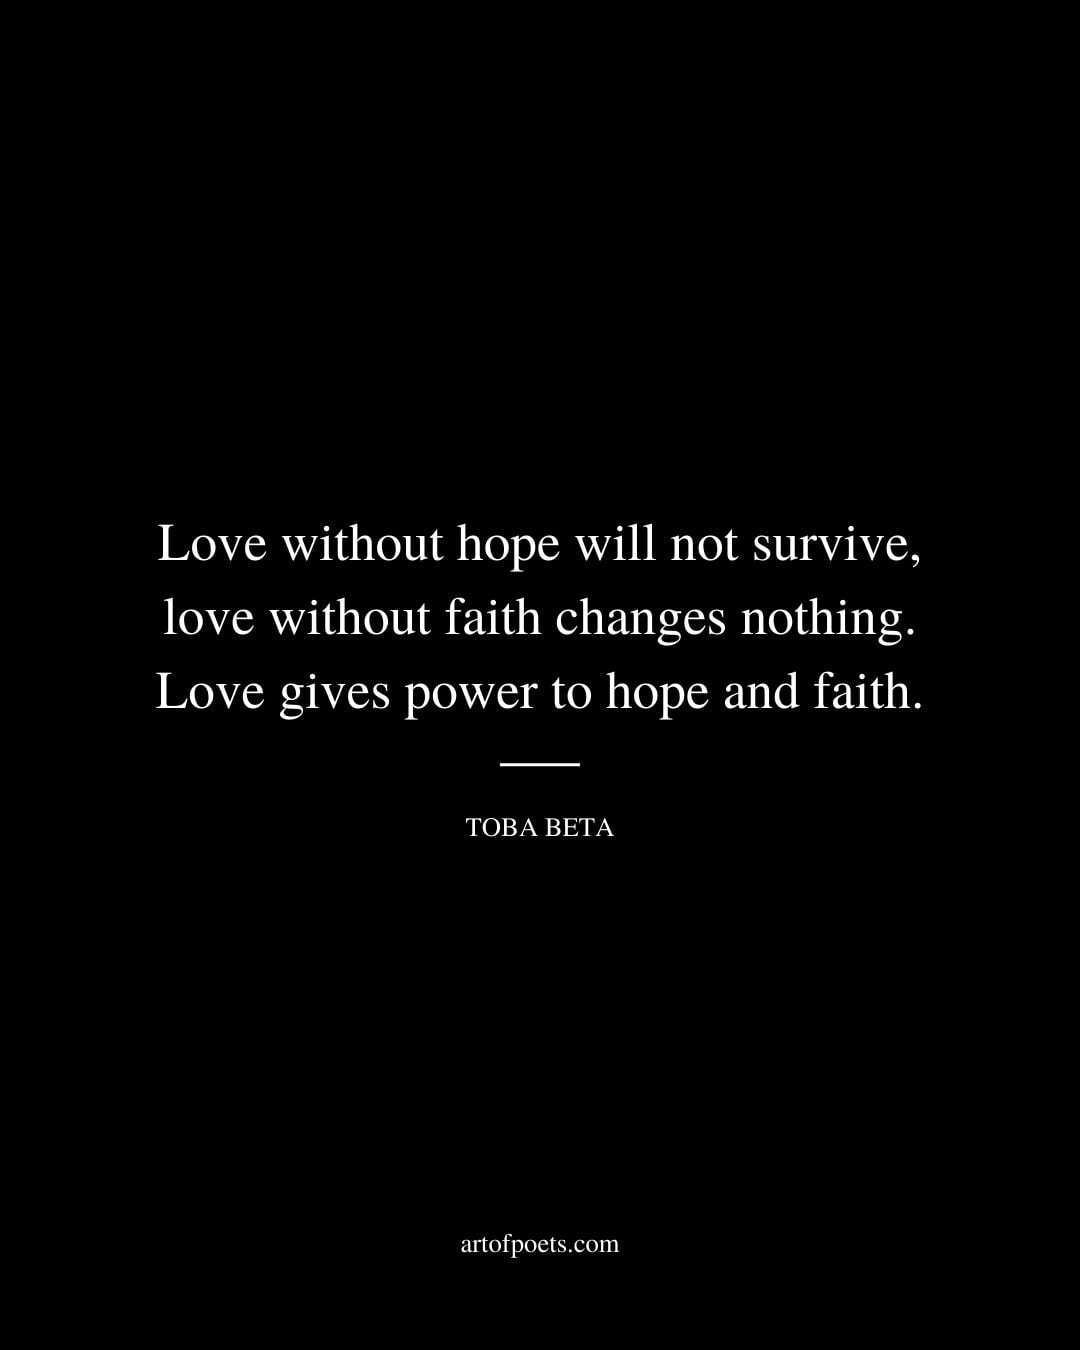 Love without hope will not survive love without faith changes nothing. Love gives power to hope and faith. Toba Beta